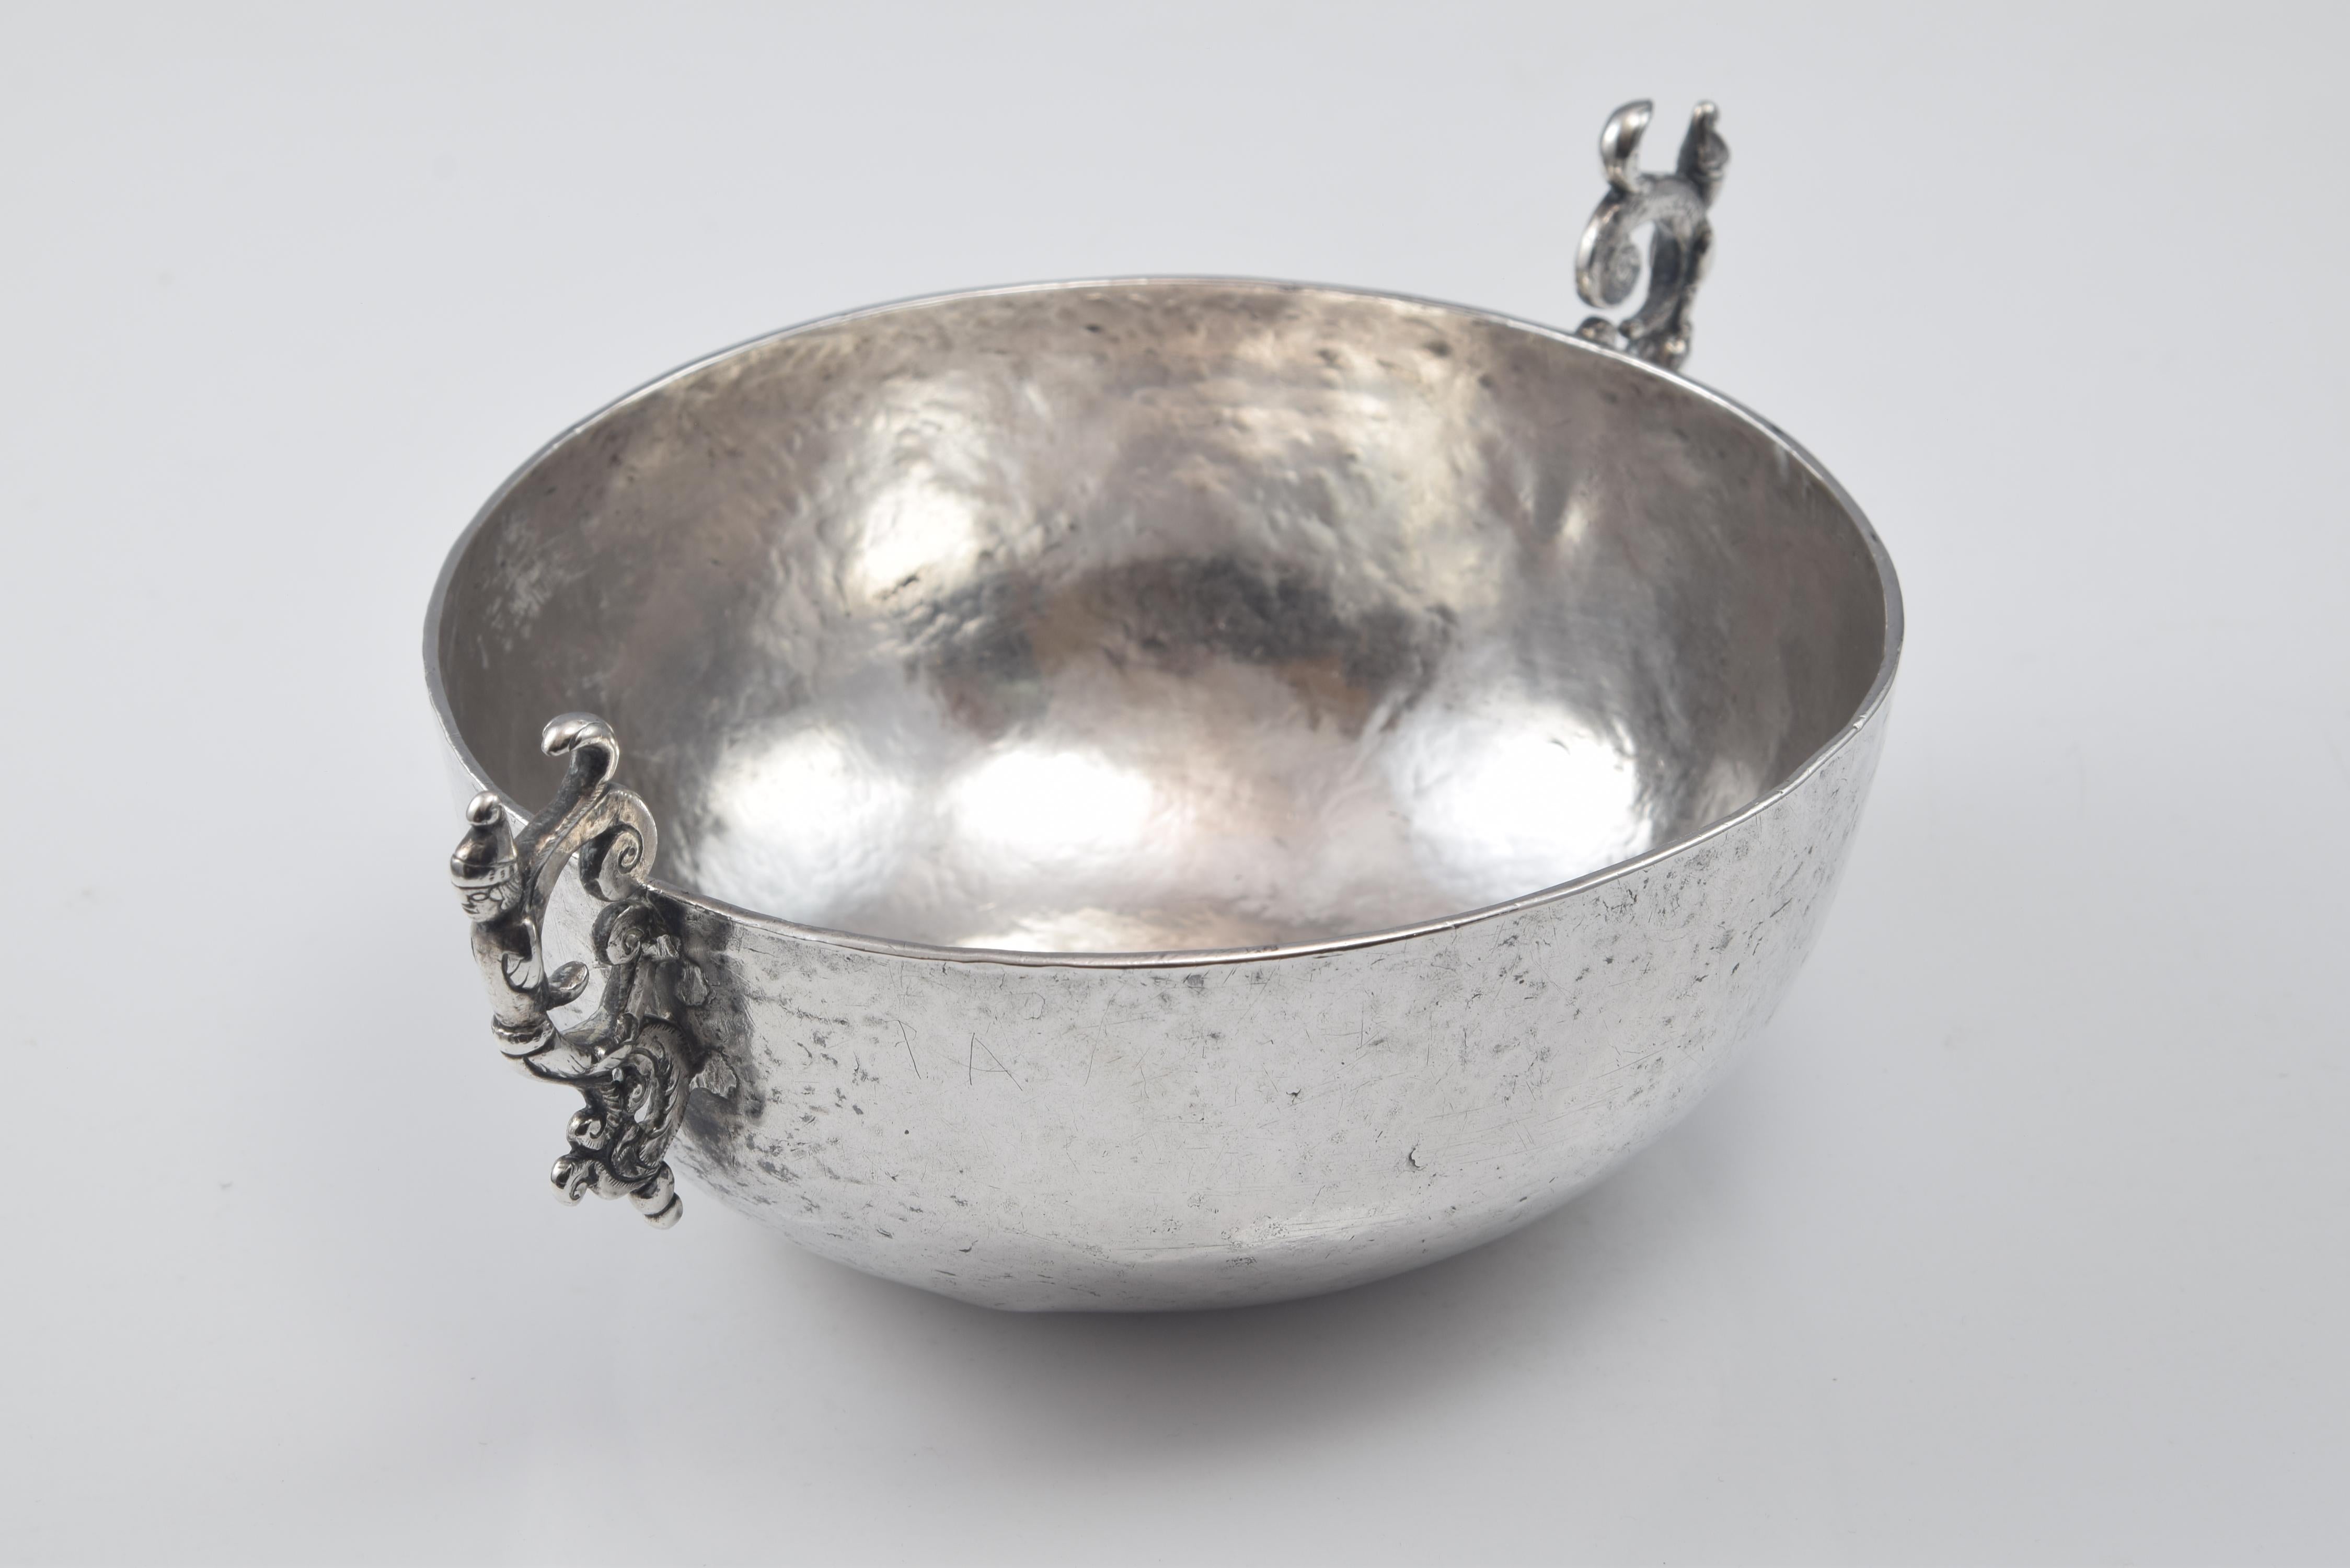 Bernegal silver. Peru, 17th century.
Trembling or catavinos made of silver in its color, handles in the form of 